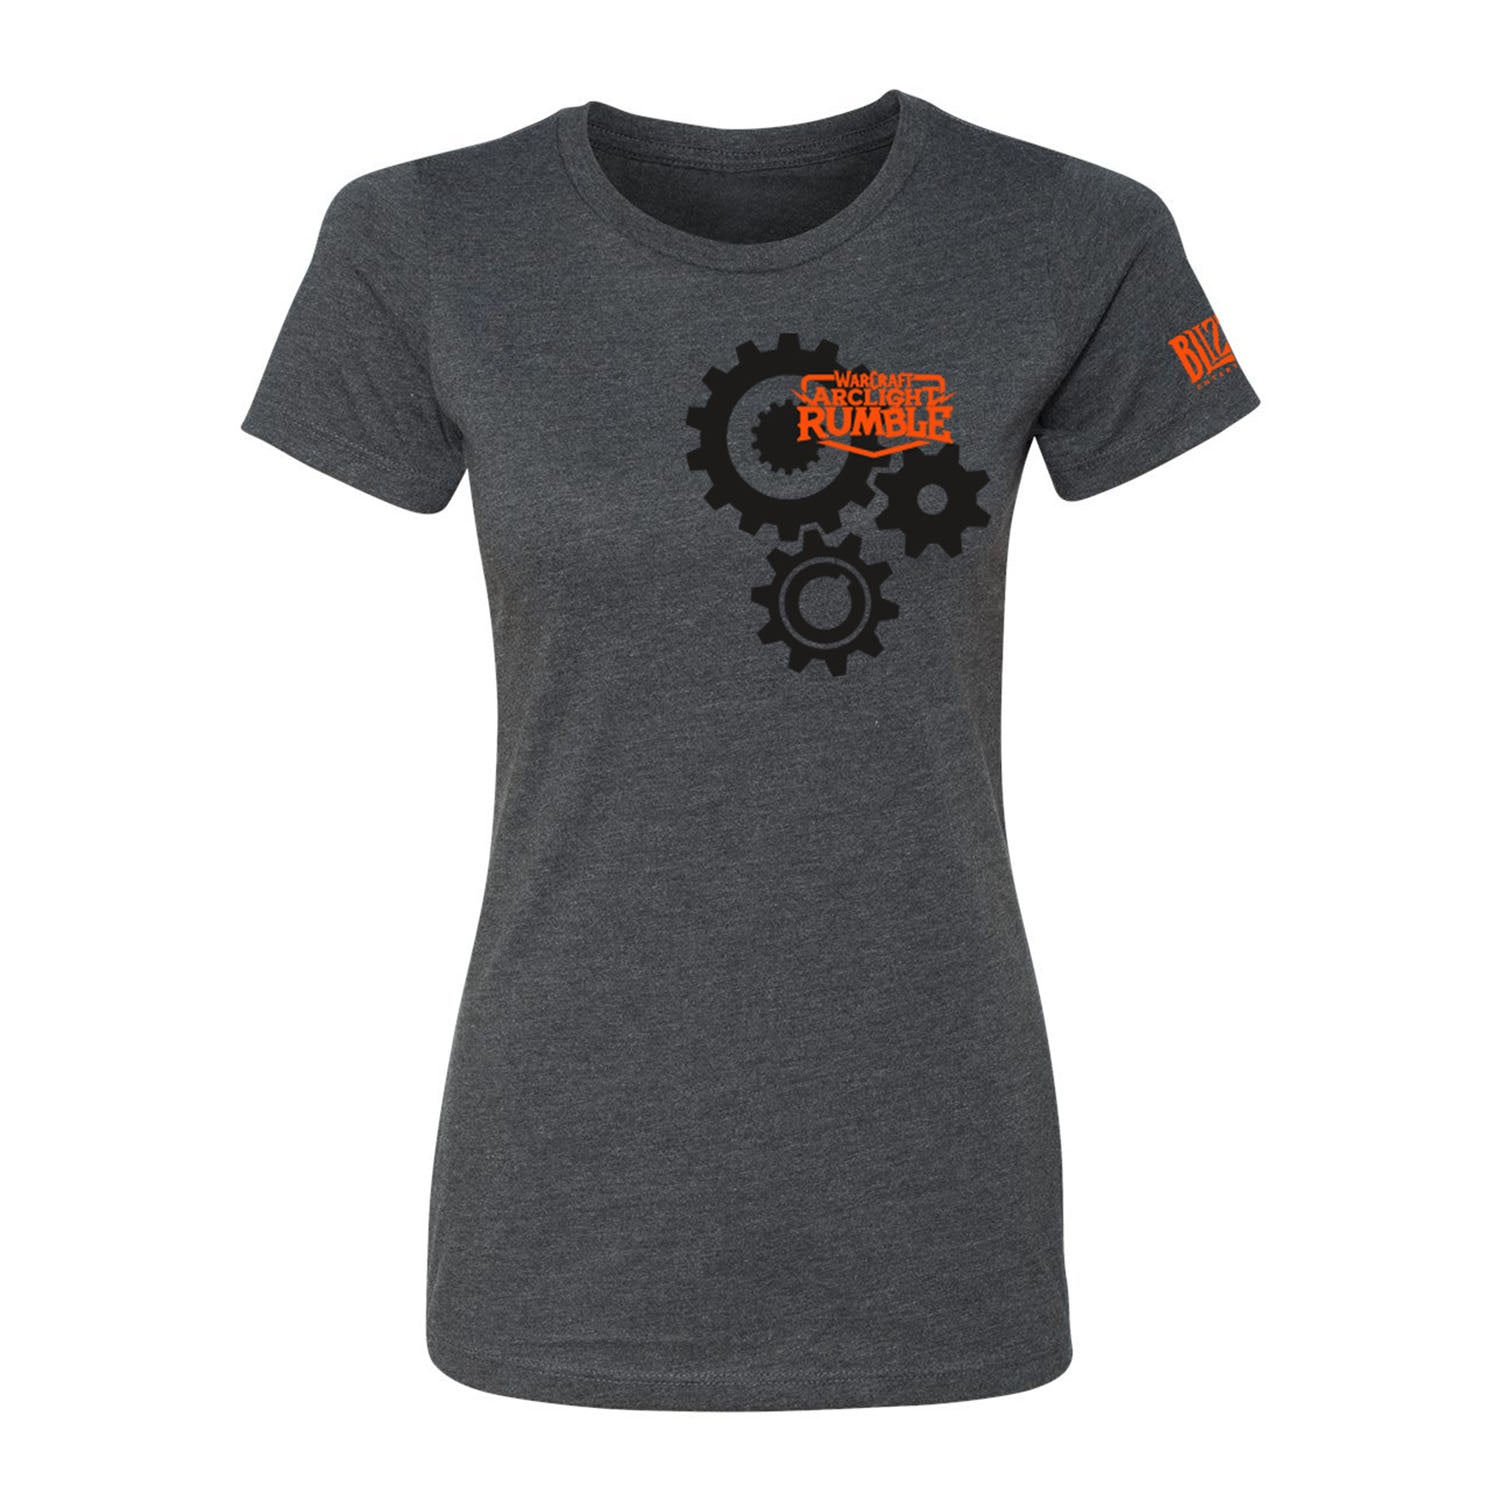 Warcraft Arclight Rumble Women's Charcoal Gears T-Shirt - Front View